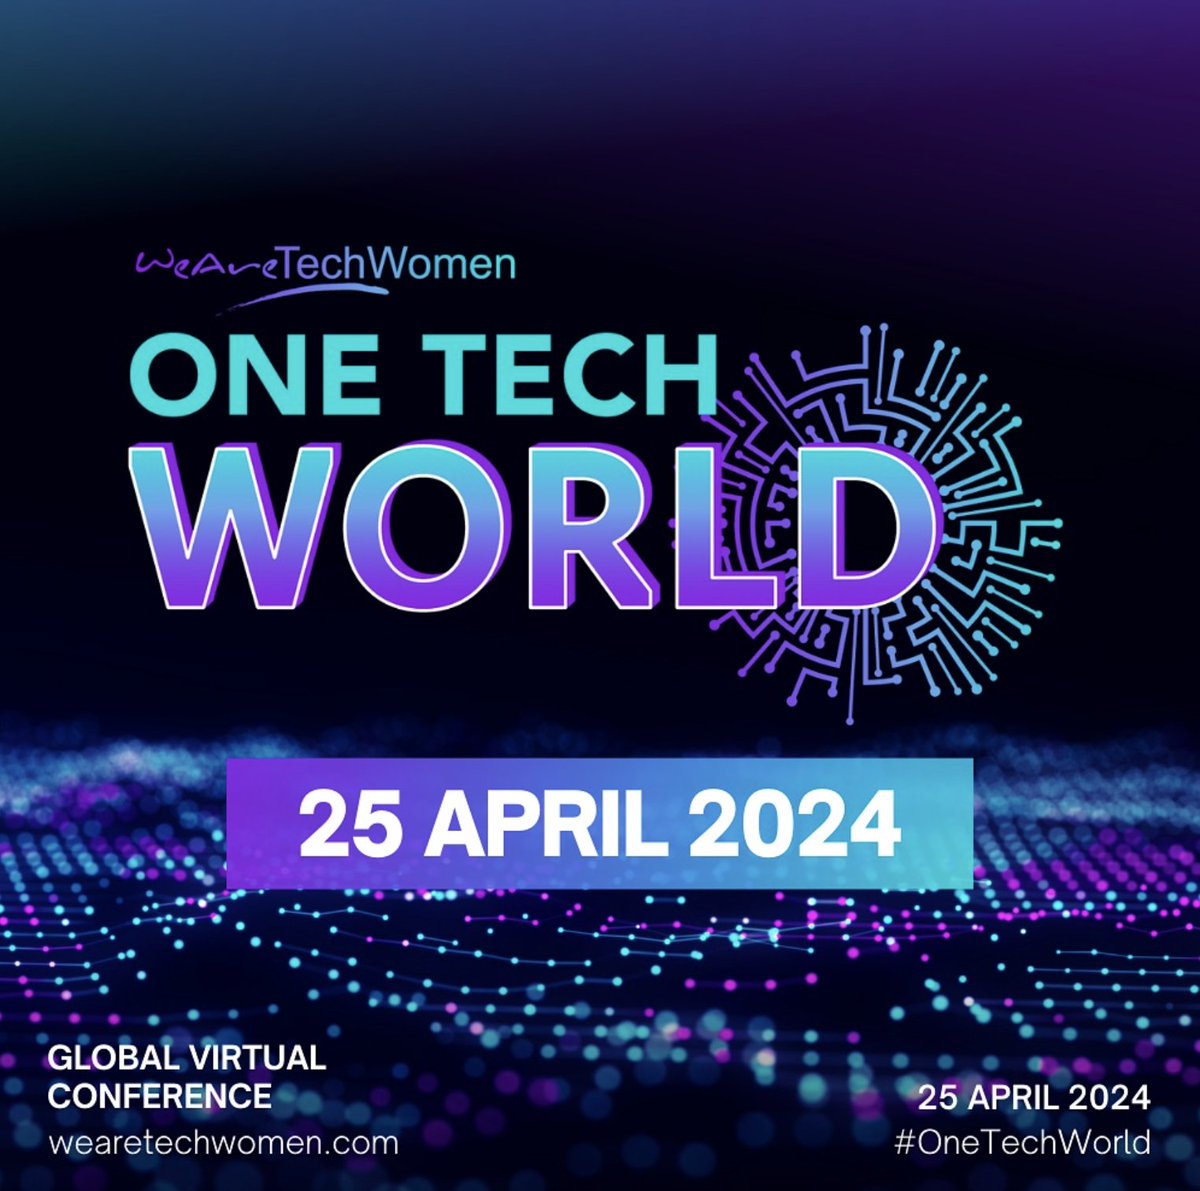 Our very own co-CEO Karen Blake is excited to be speaking at this year's @WeAreTechWomen's #OneTechWorld. Join her and other renowned speakers from around the world. The event is virtual and FREE. hubs.la/Q02qVgWx0 #WomenInTech #UKTech